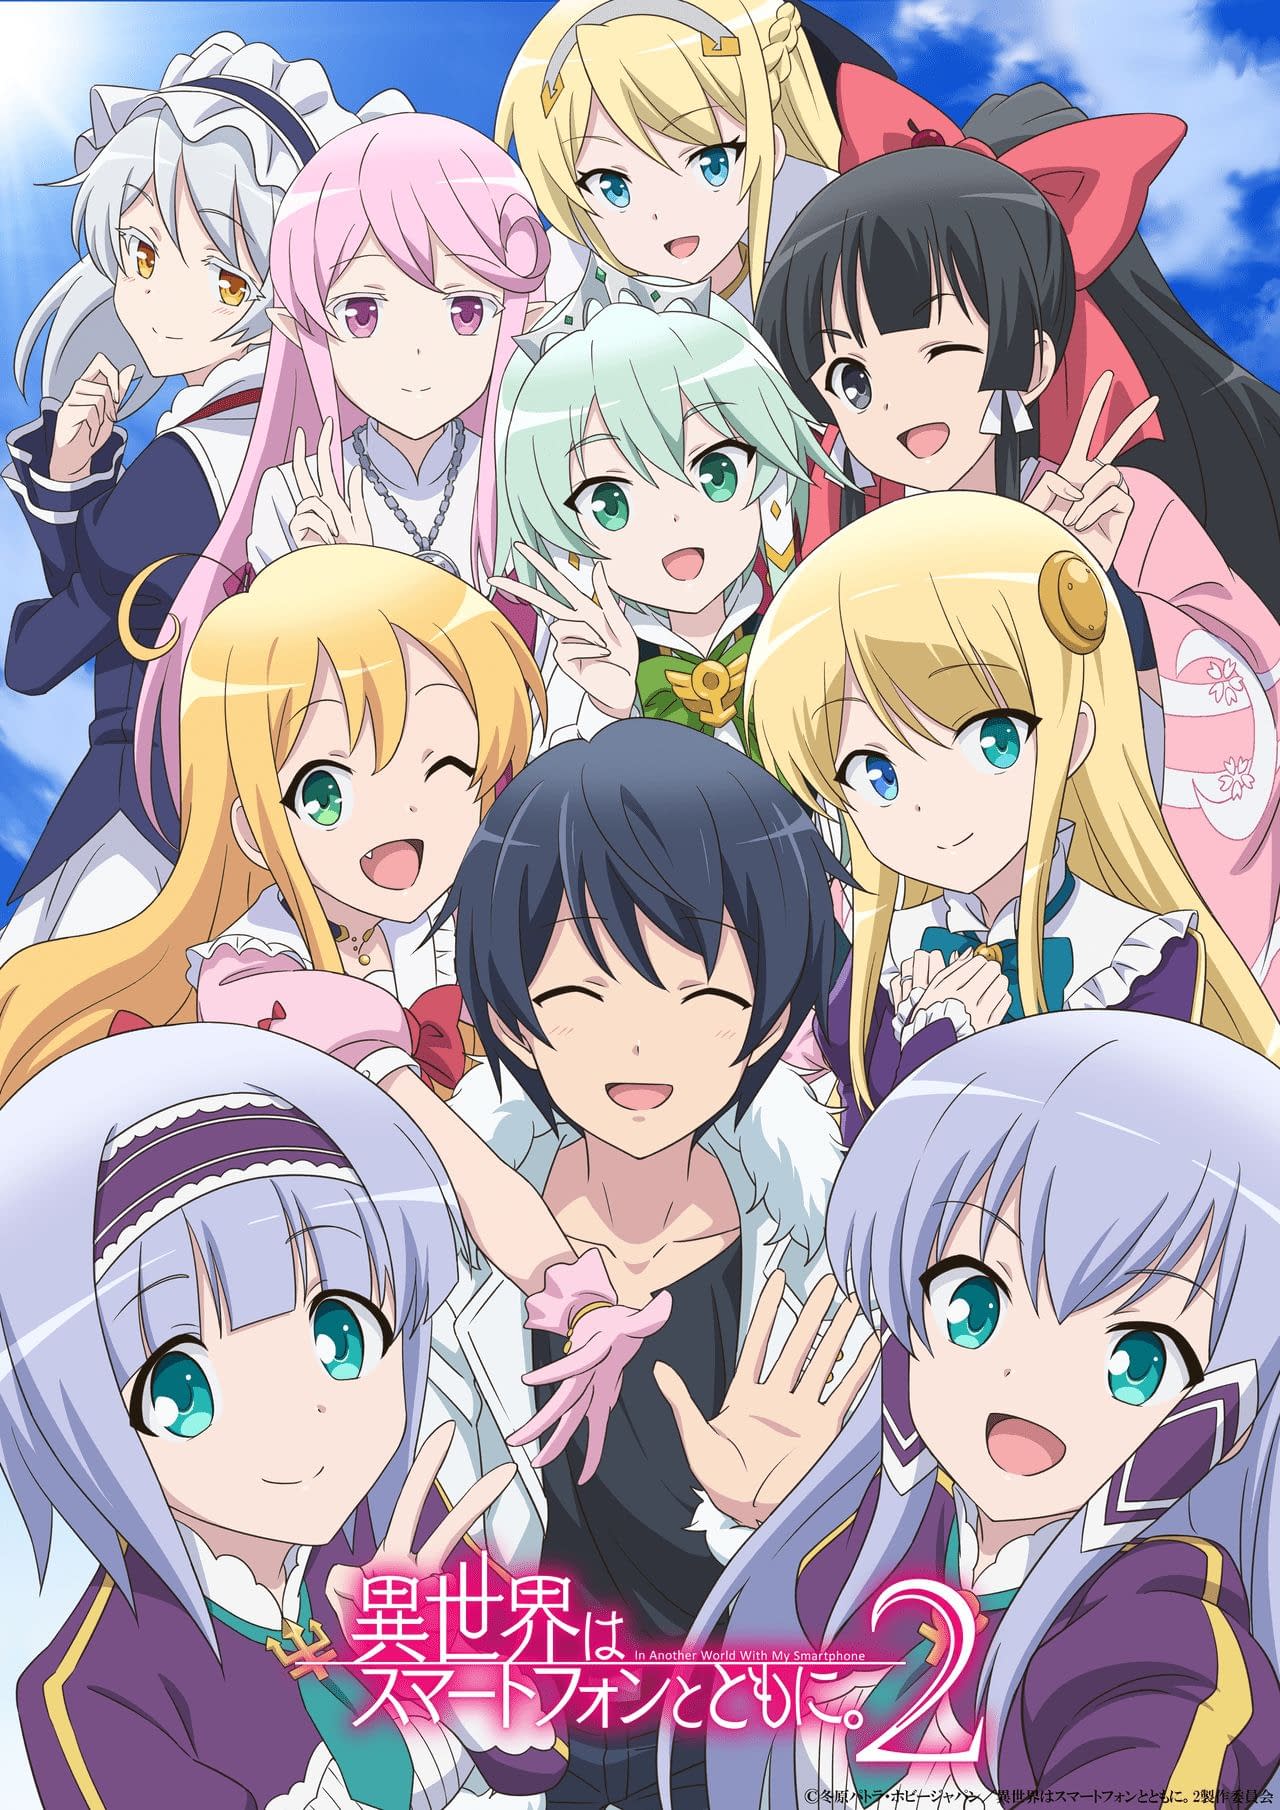 Crunchyroll Sets 'I Got a Cheat Skill in Another World' TV Anime